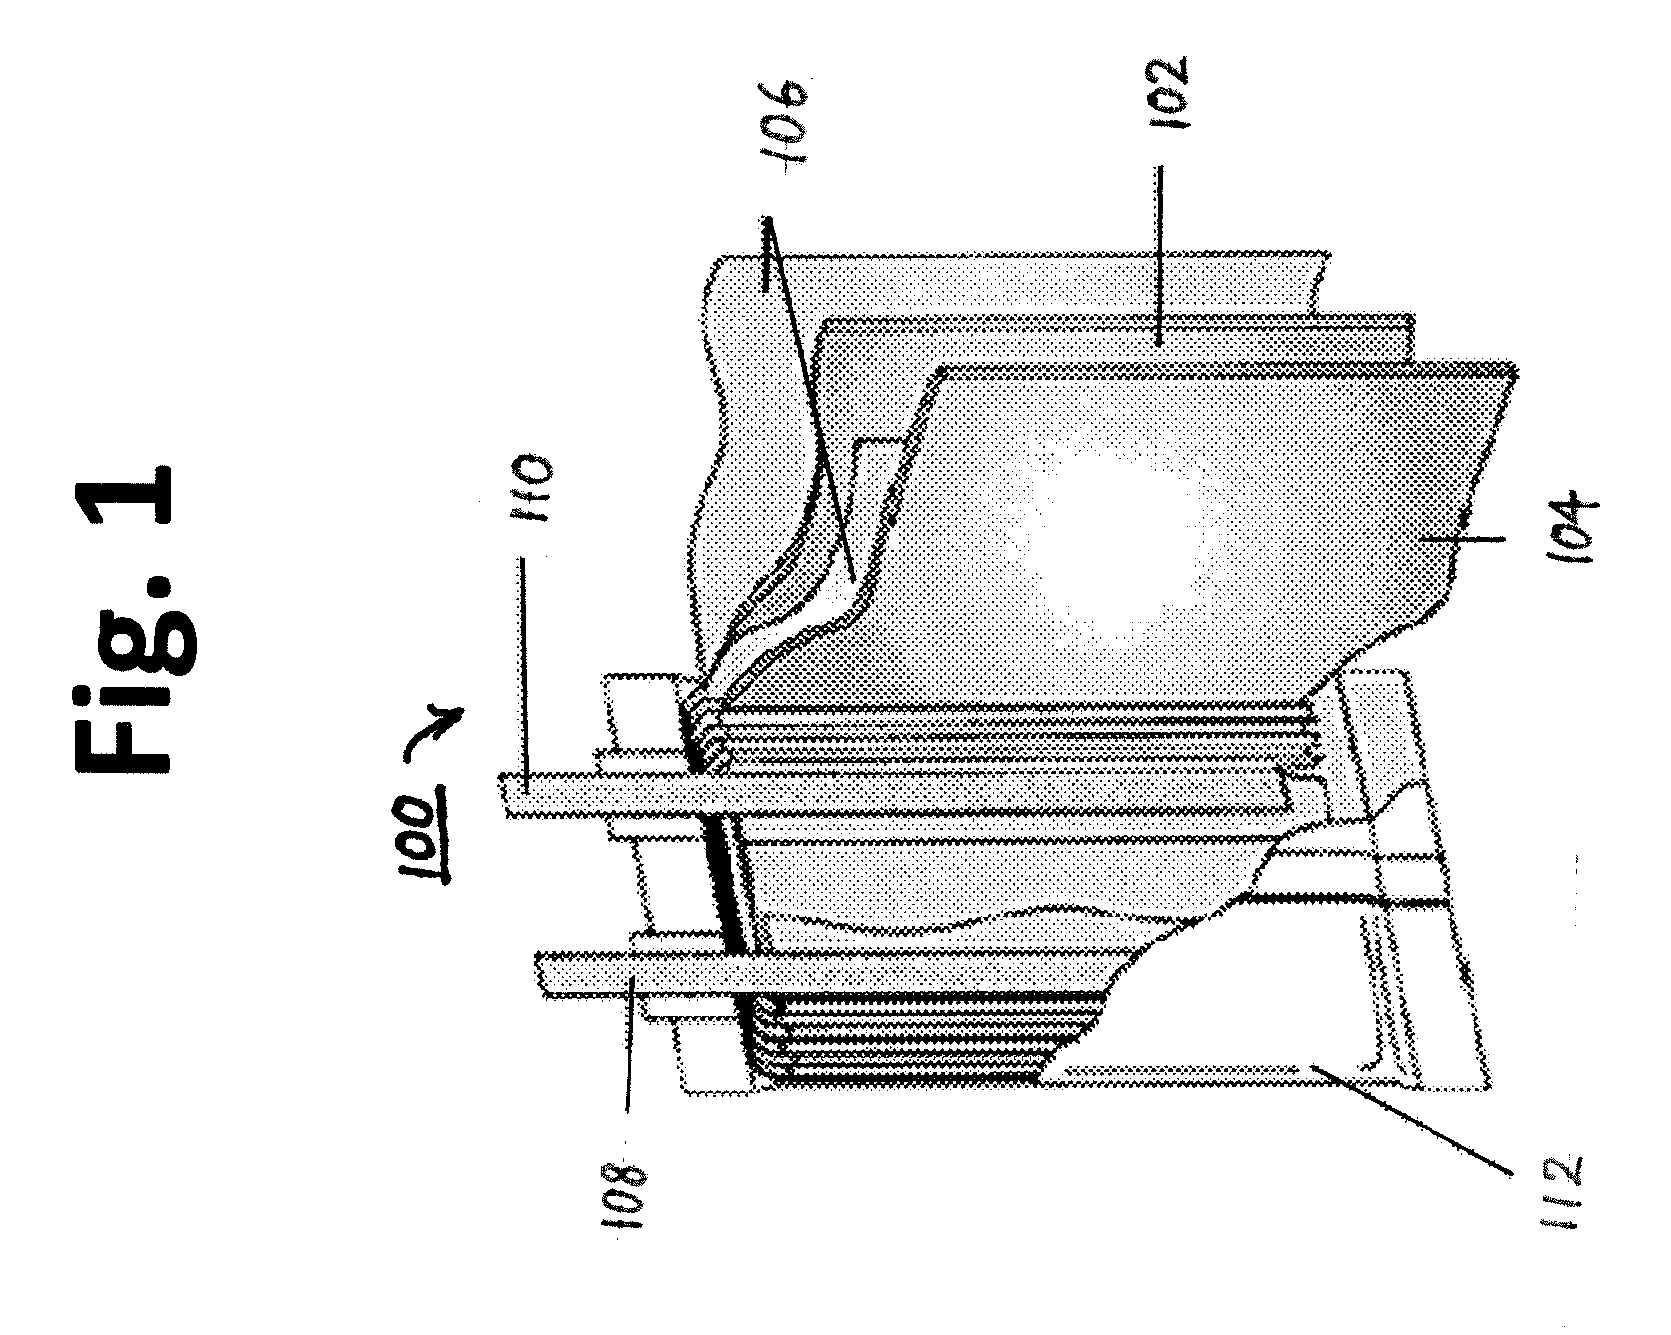 High energy lithium ion batteries with particular negative electrode compositions